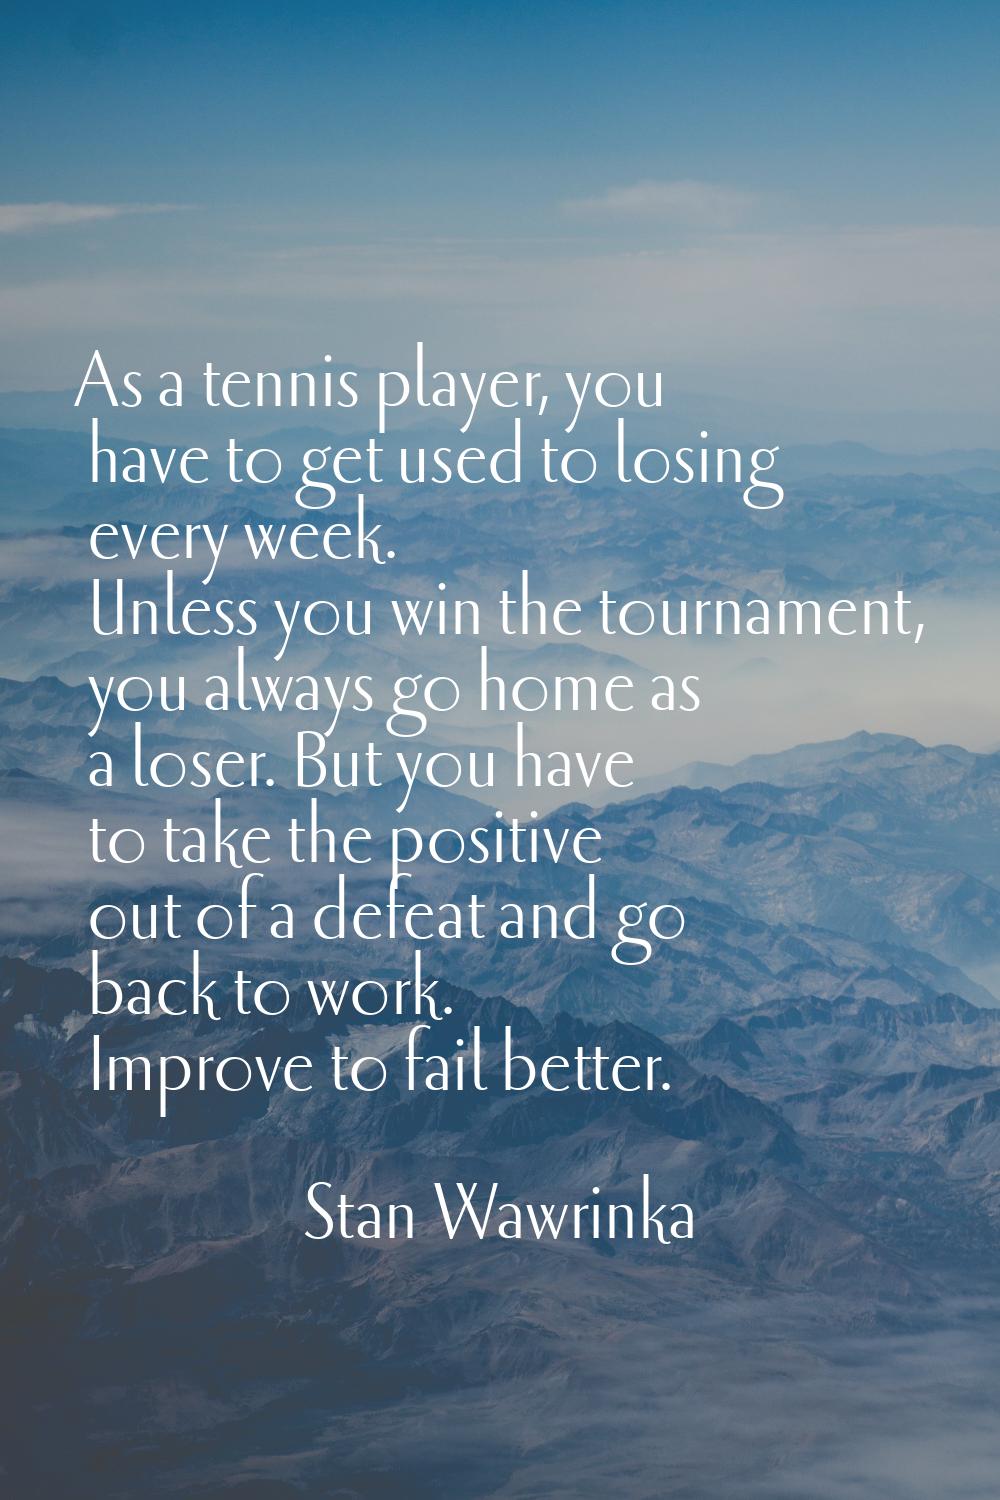 As a tennis player, you have to get used to losing every week. Unless you win the tournament, you a